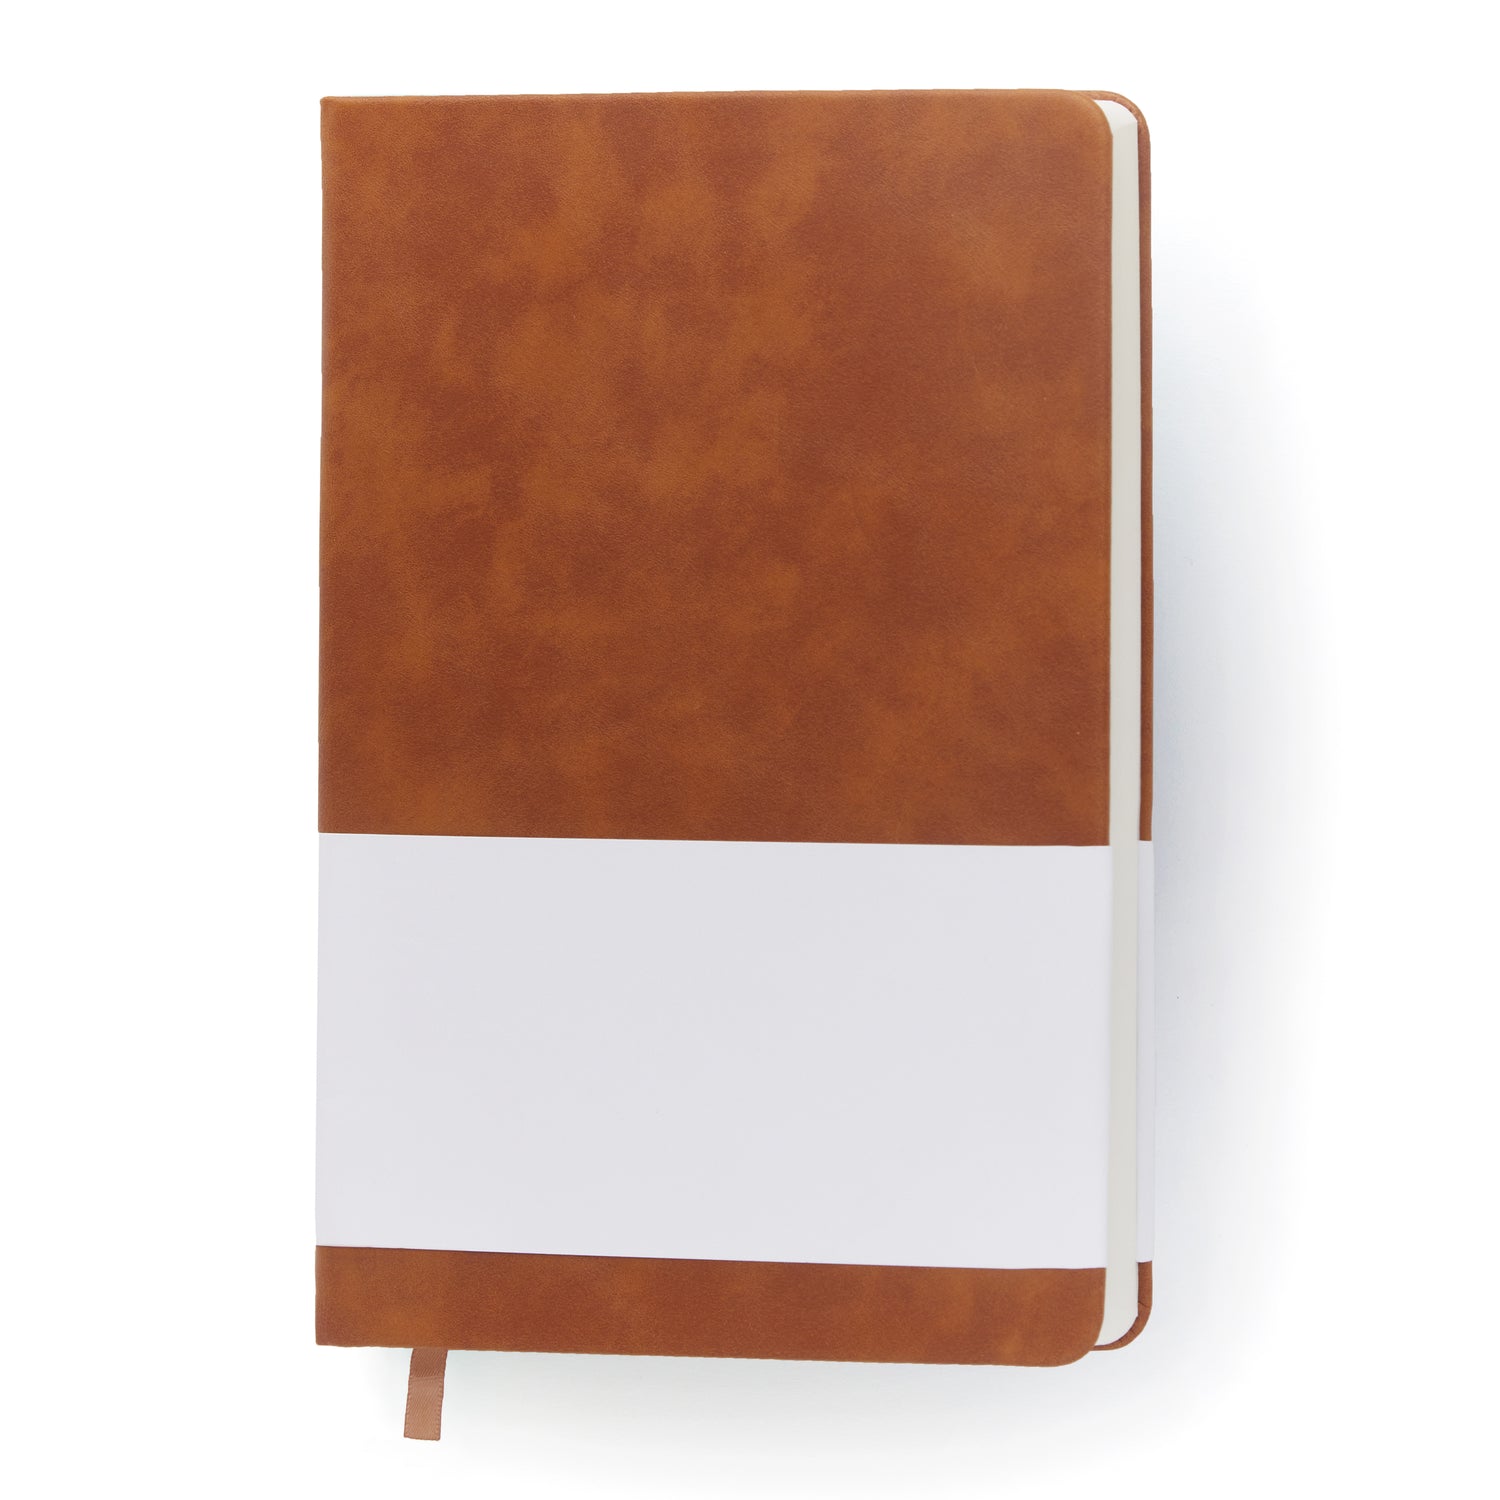 Achieve More: Using a Productivity Journal for Goal Tracking